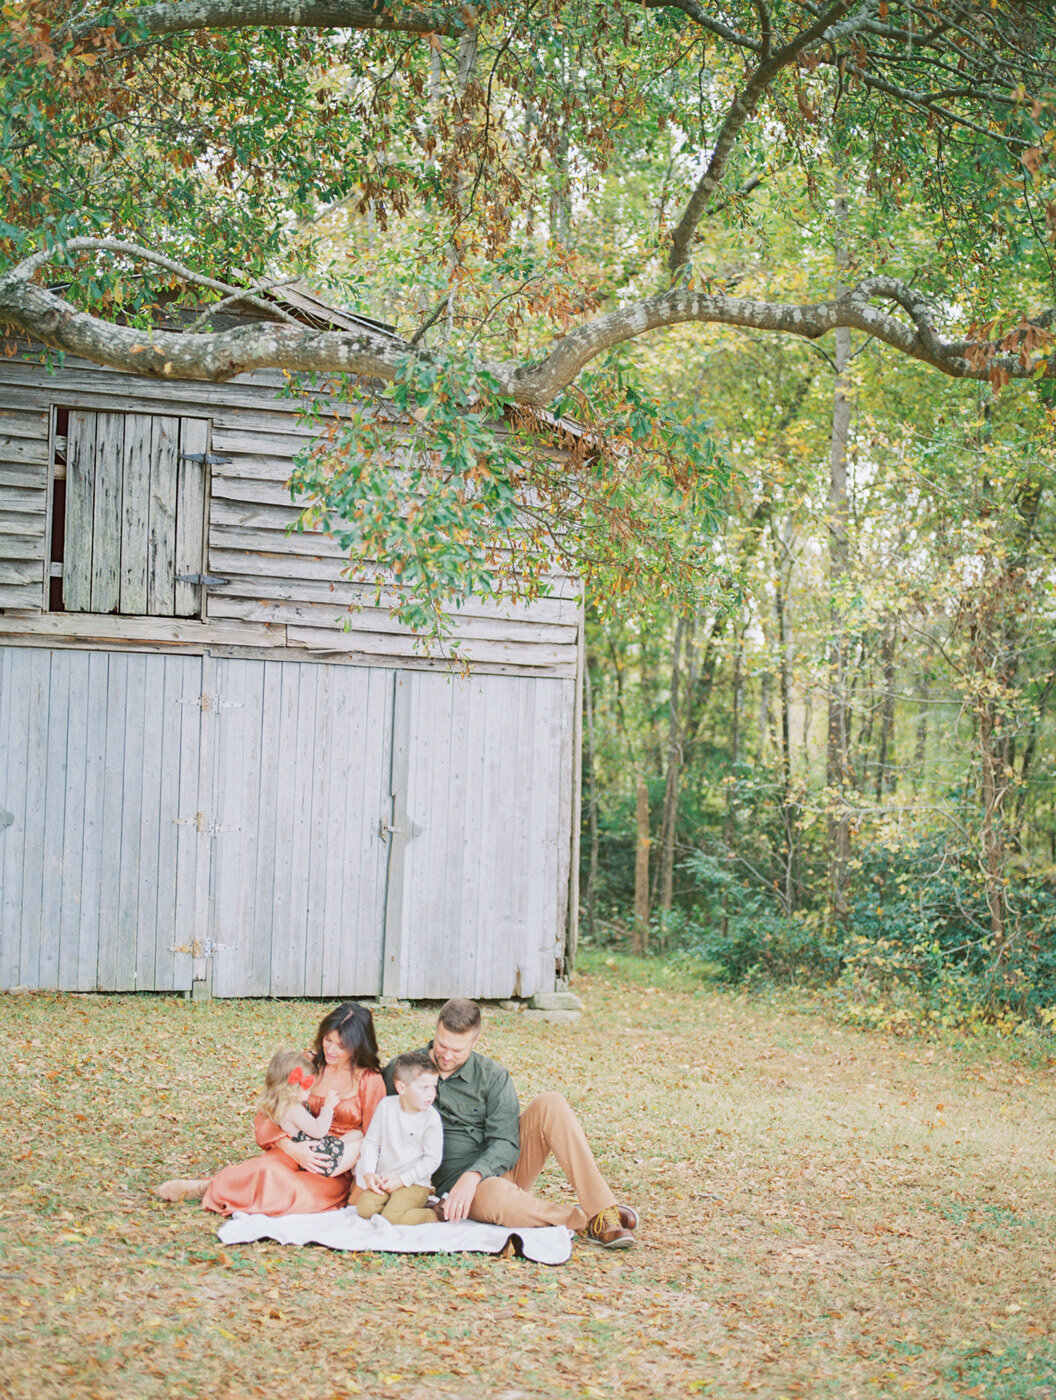 Raleigh Family Photographer | Jessica Agee Photography - 003